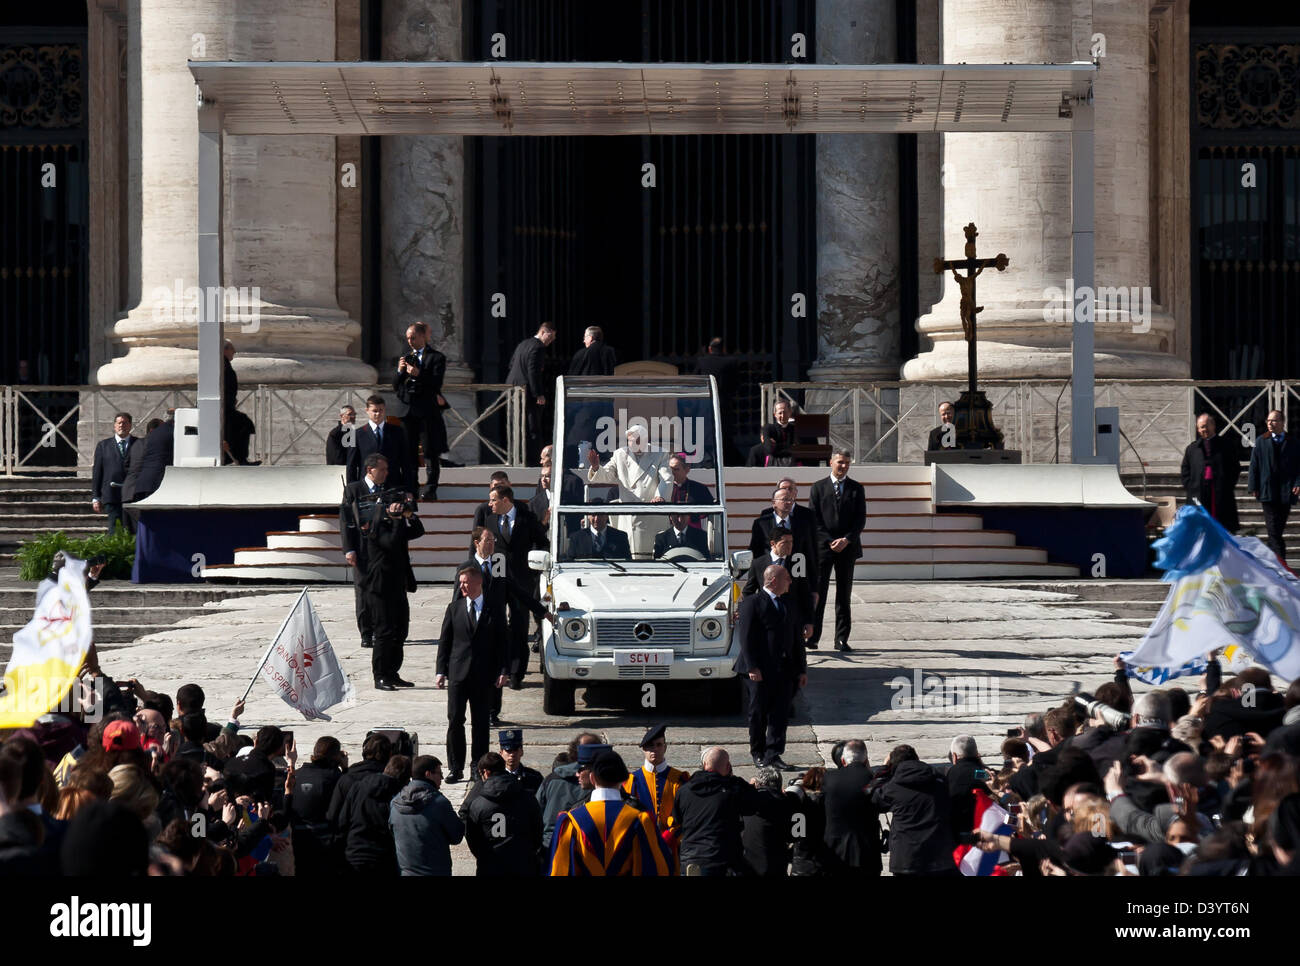 Rome, Italy. 27th February 2013  Pope Benedict XVI waves to the crowd as he departs from St Peter's Square at the Vatican. Credit: Nelson Pereira/Alamy Live News Stock Photo